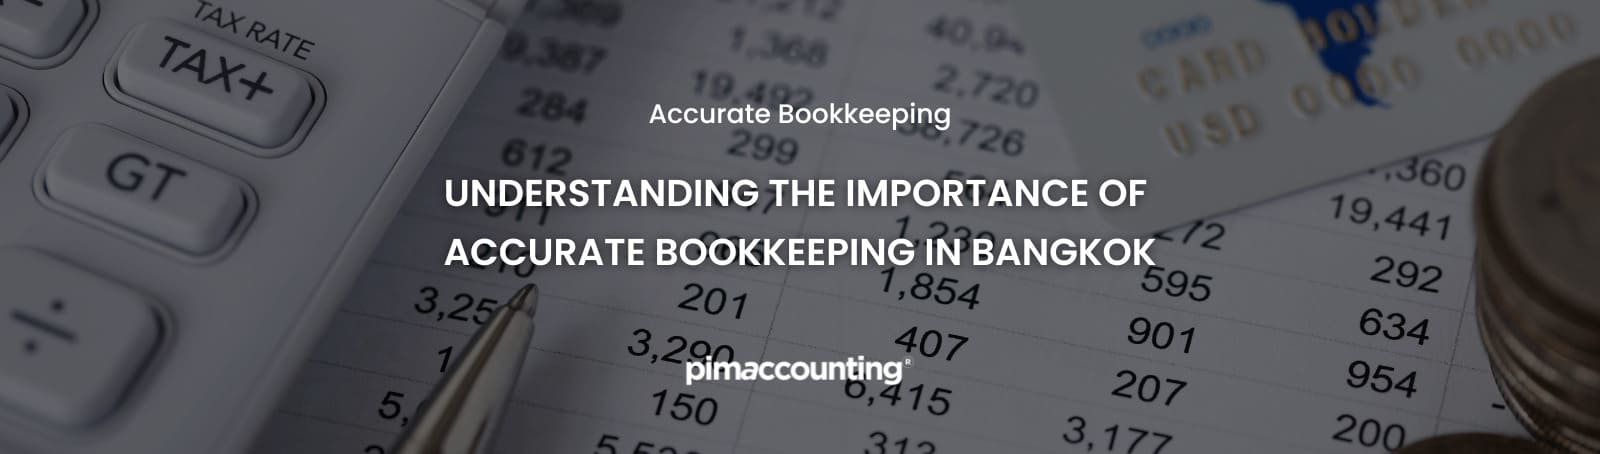 Accurate bookkeeping - pimaccounting